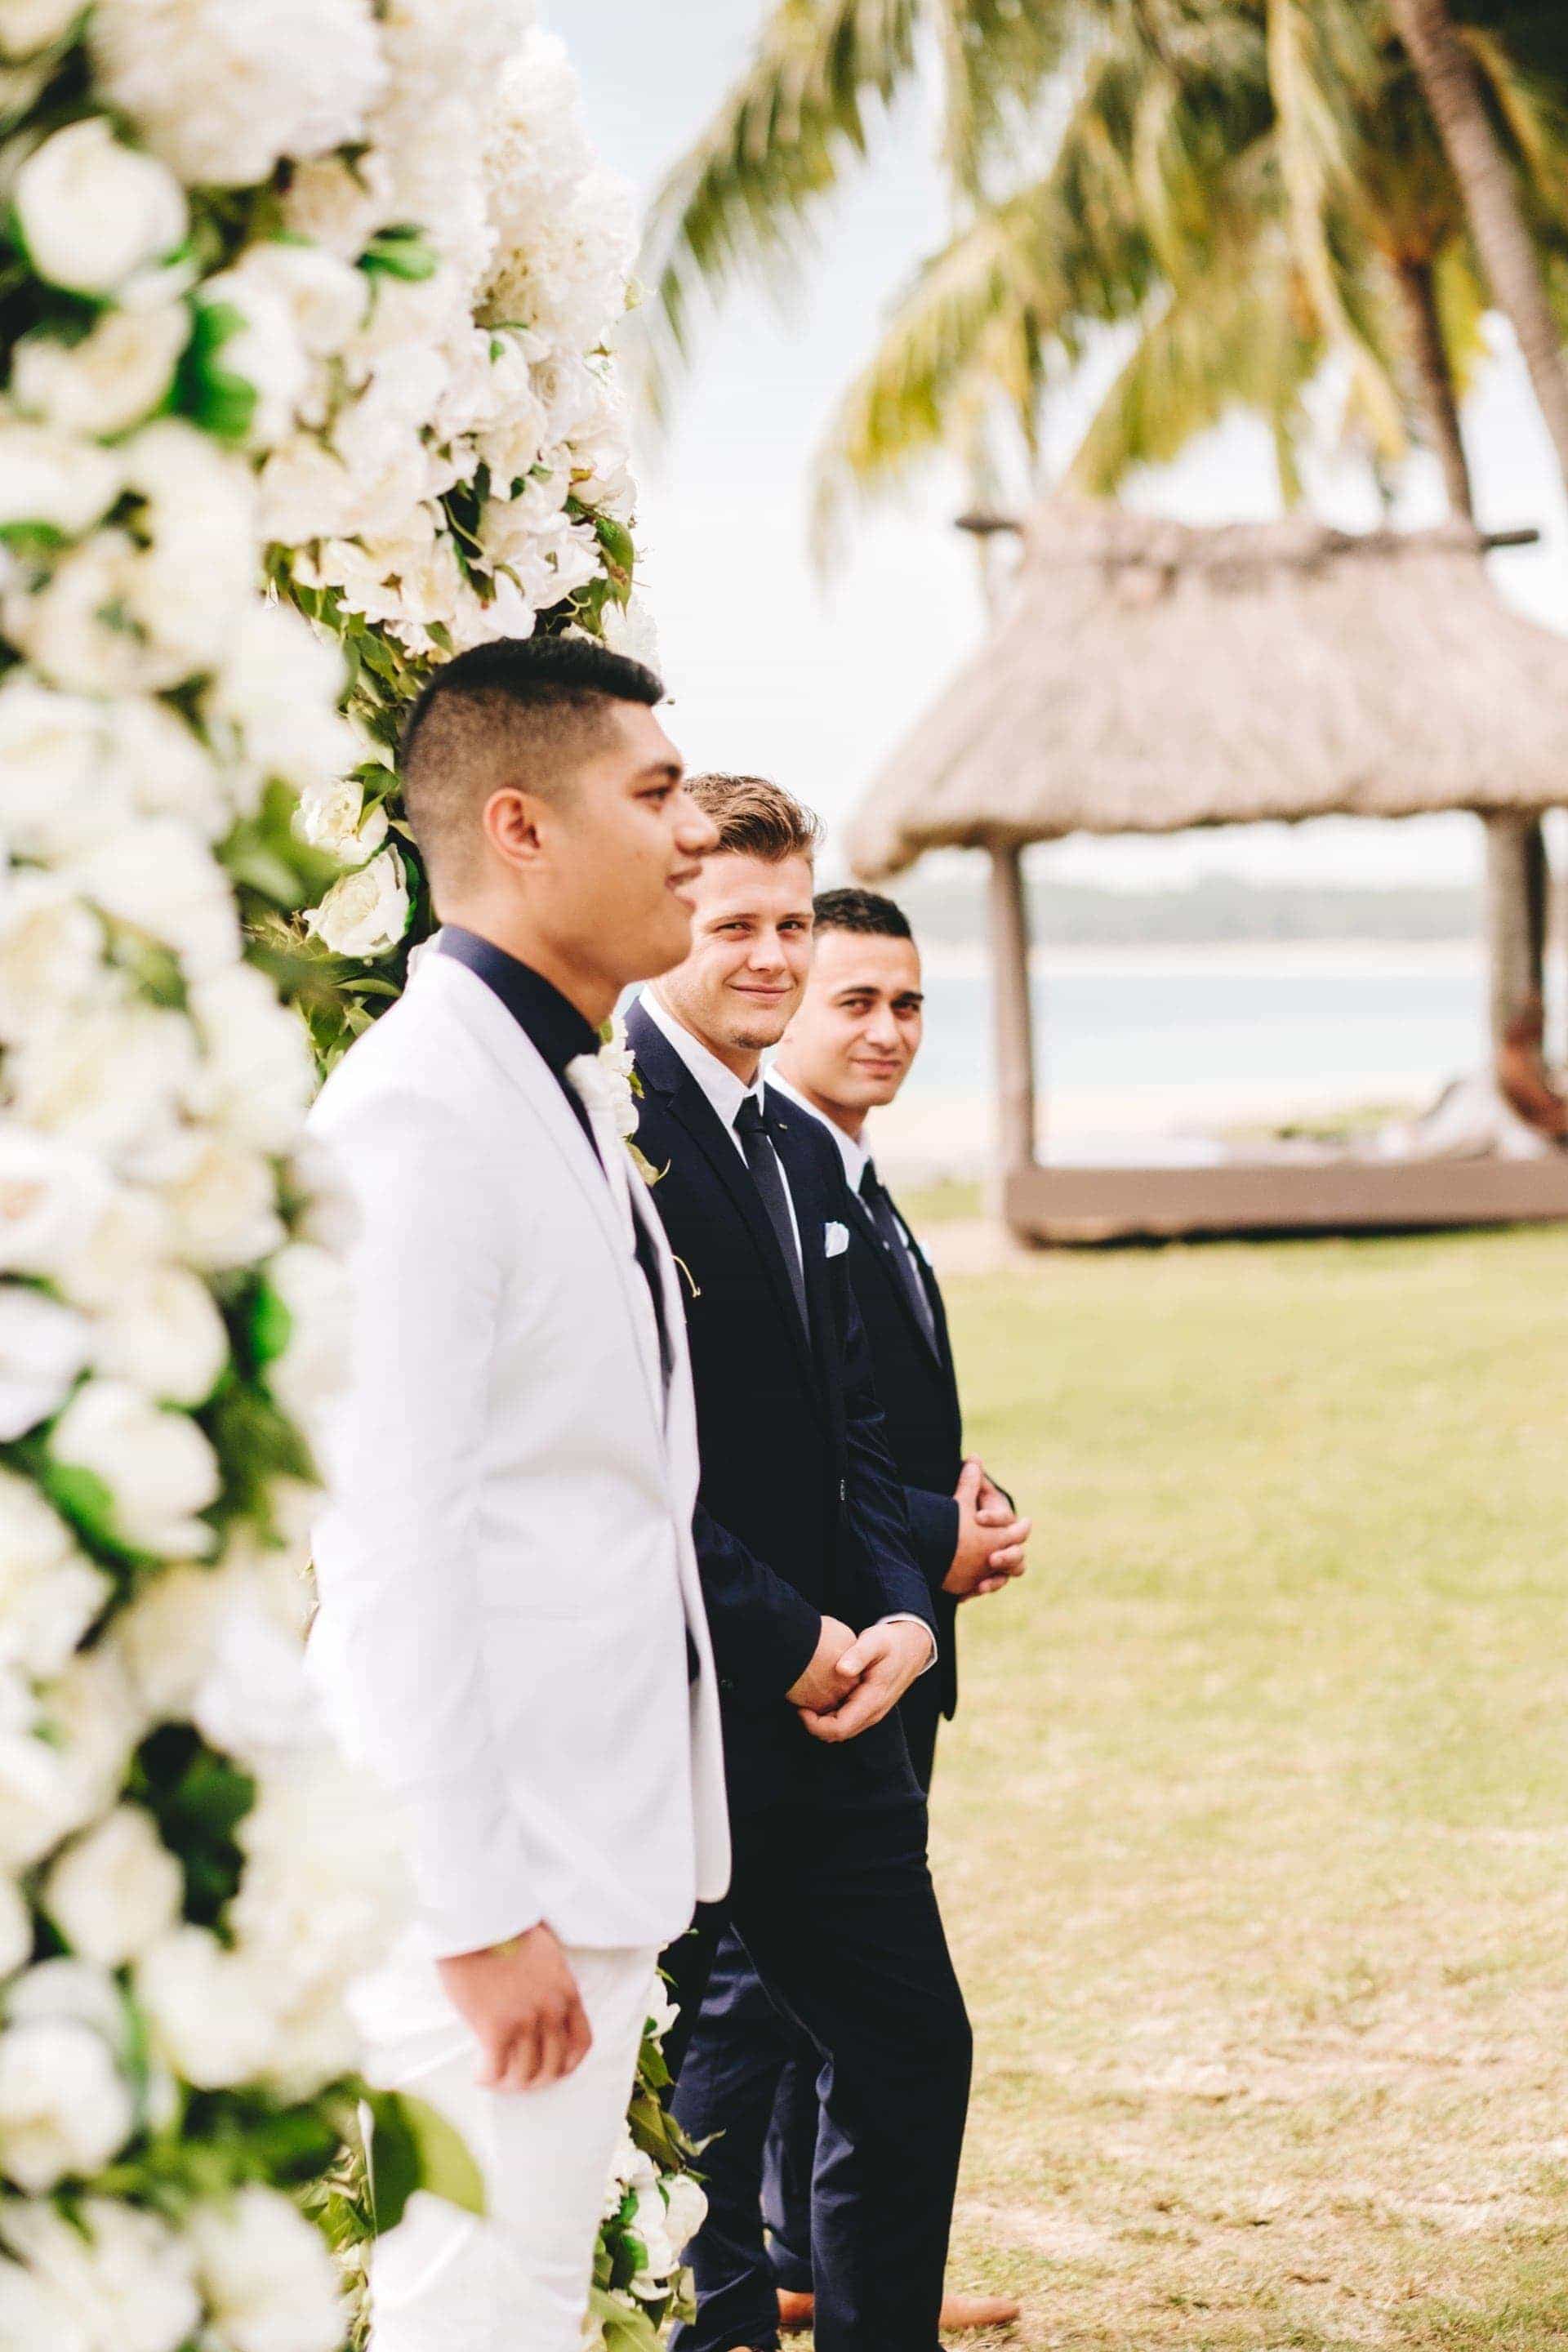 the groom waiting excitedly at ceremony arch as the groomsman and best man watch on